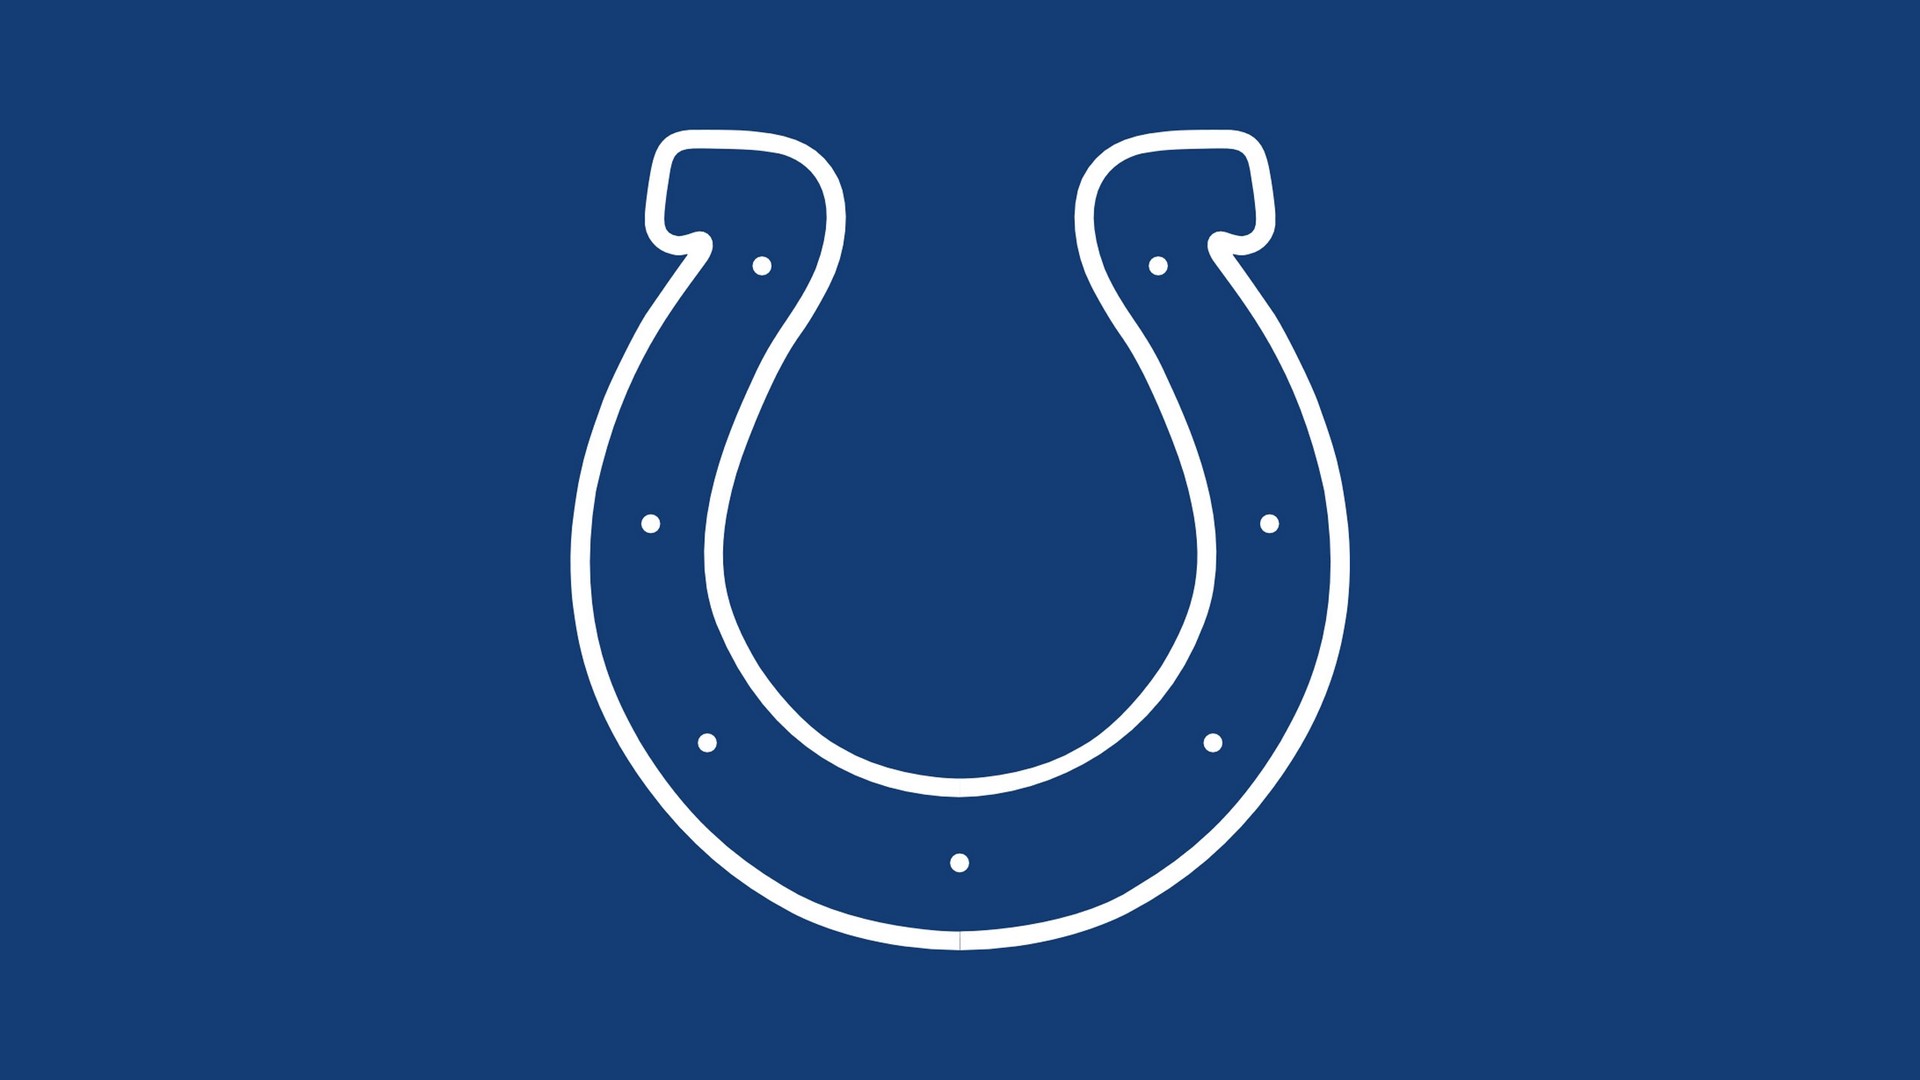 Best Indianapolis Colts Wallpaper in HD With high-resolution 1920X1080 pixel. Download and set as wallpaper for Desktop Computer, Apple iPhone X, XS Max, XR, 8, 7, 6, SE, iPad, Android